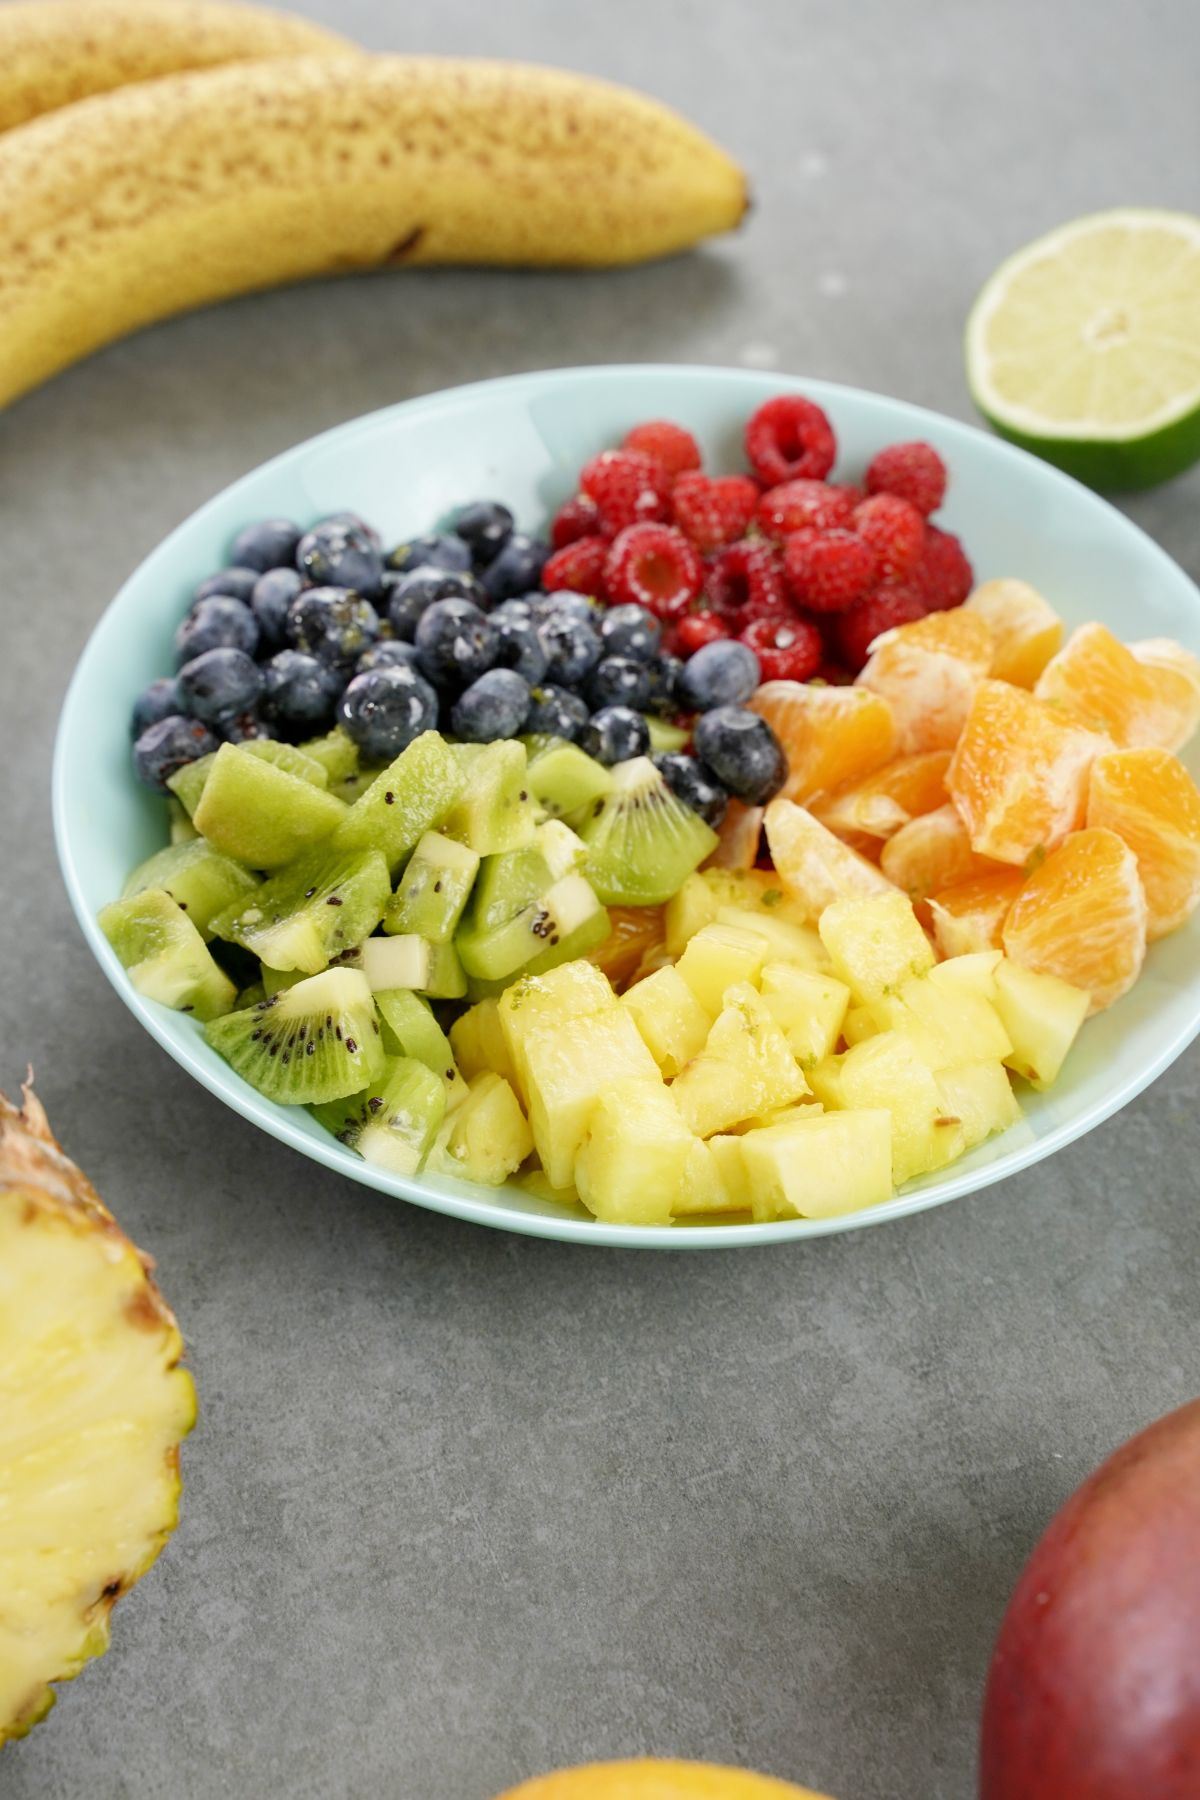 Rainbow Fruit Salad with Honey Dressing served with a whole banana, half lemon and pineapple